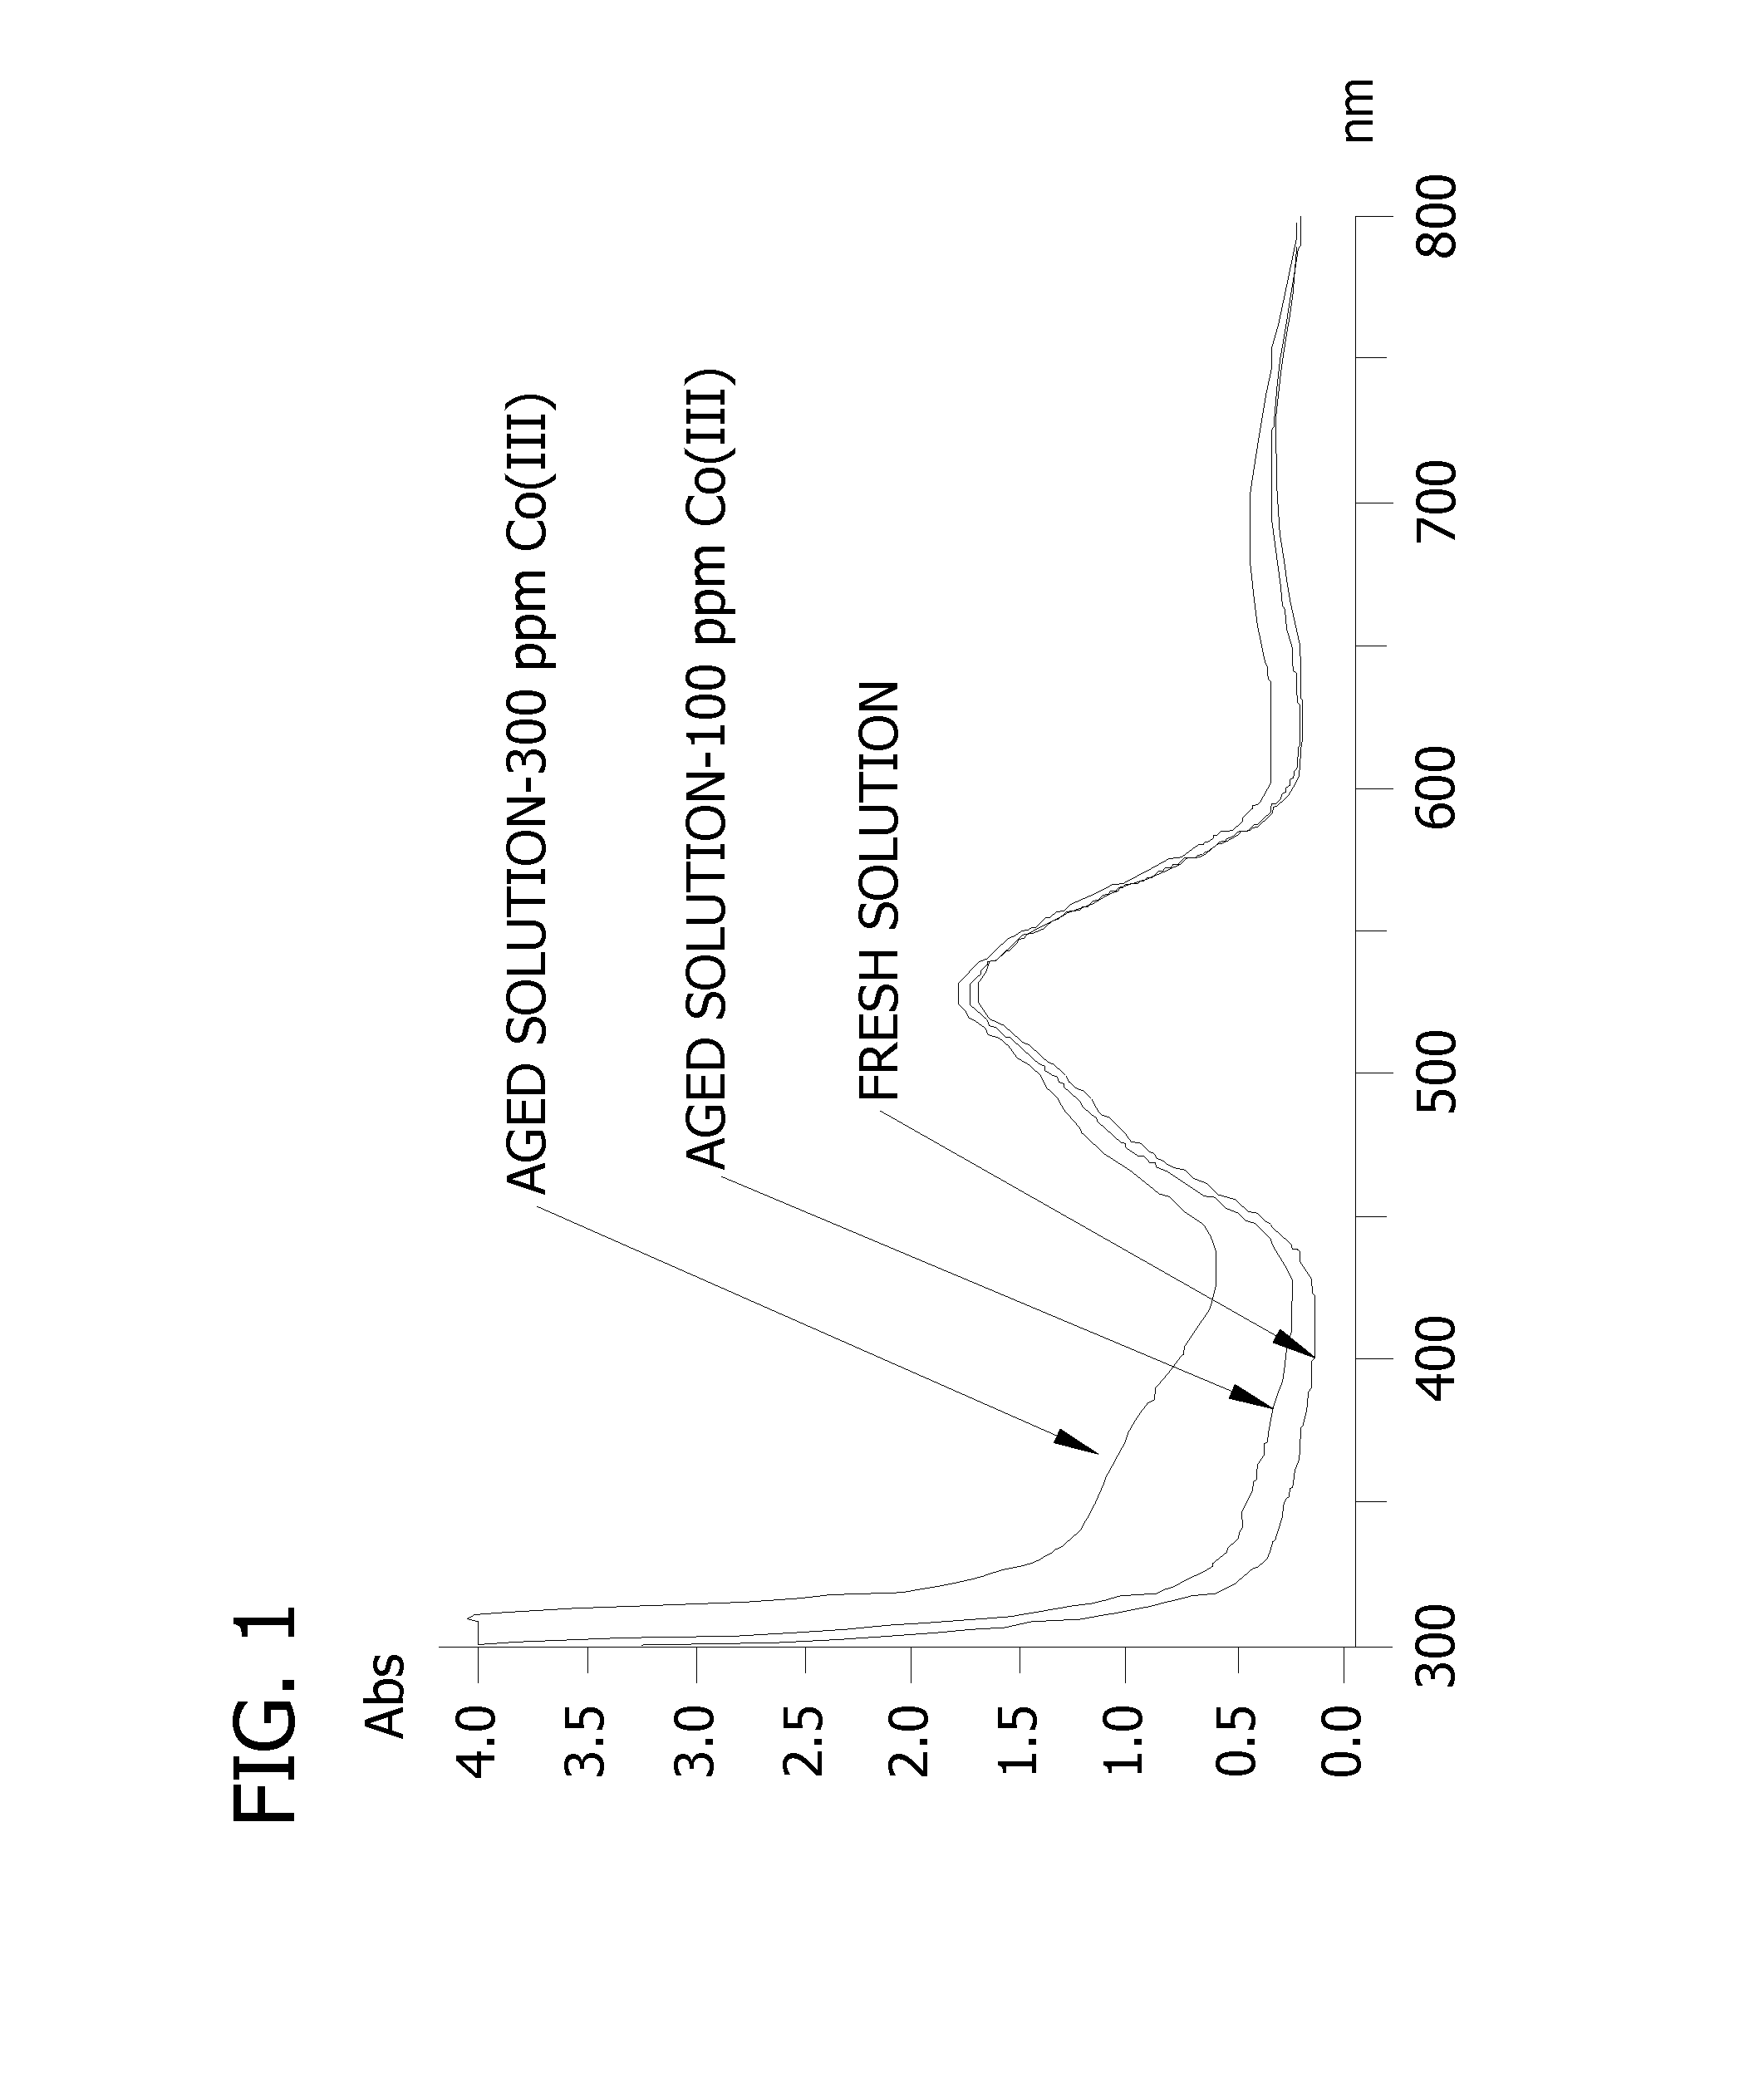 Manufacture of electroless cobalt deposition compositions for microelectronics applications